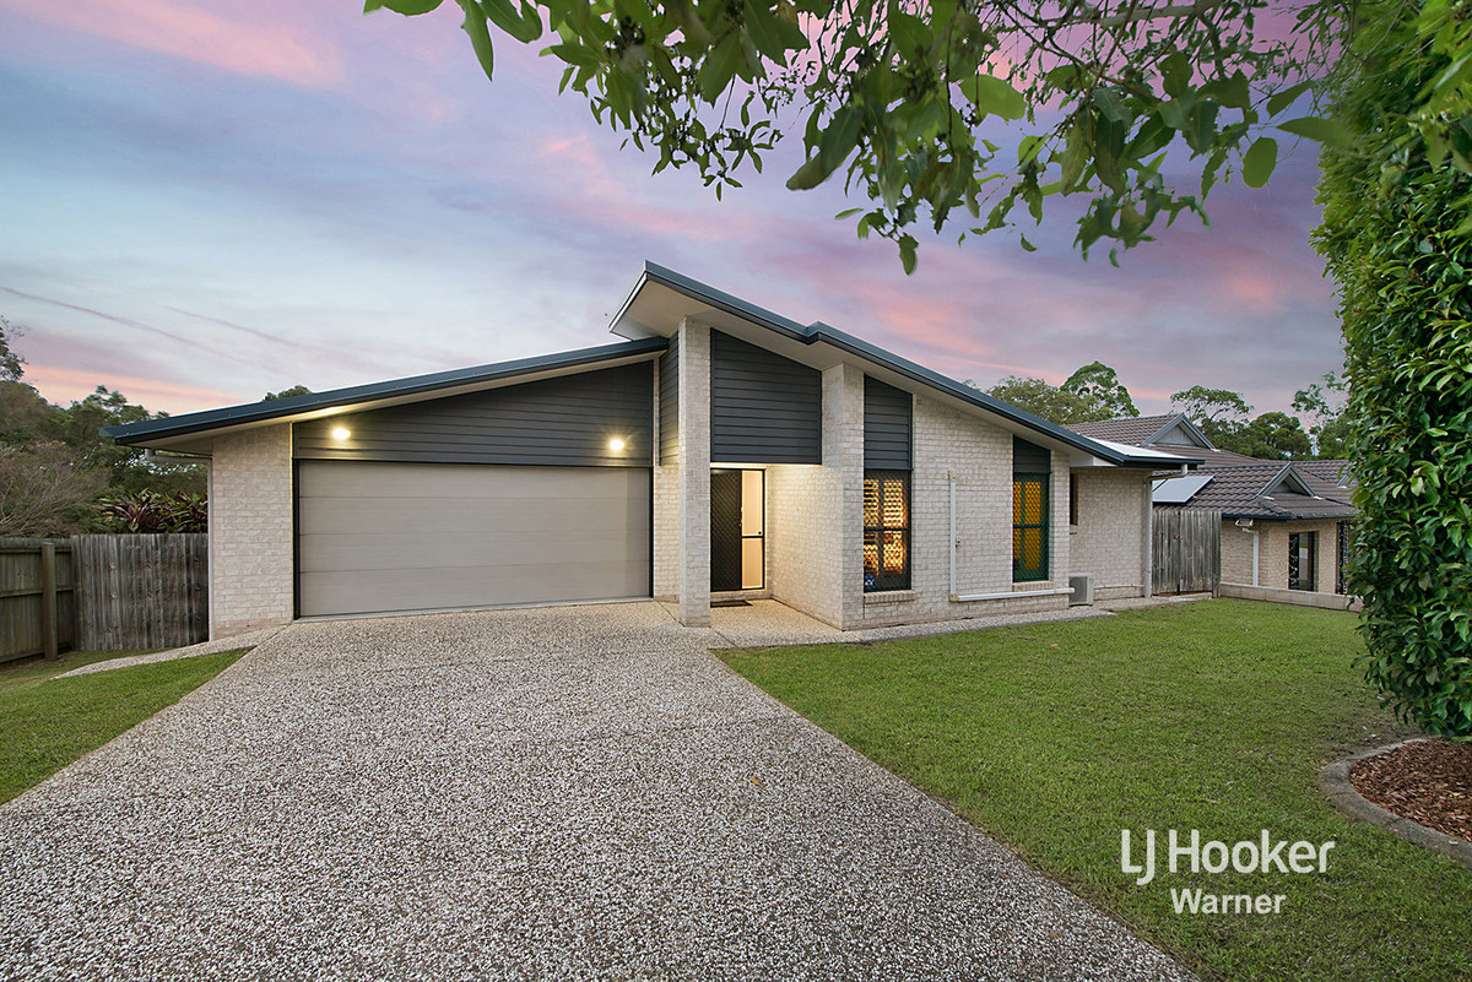 Main view of Homely house listing, 79 Brisbane Road, Warner QLD 4500